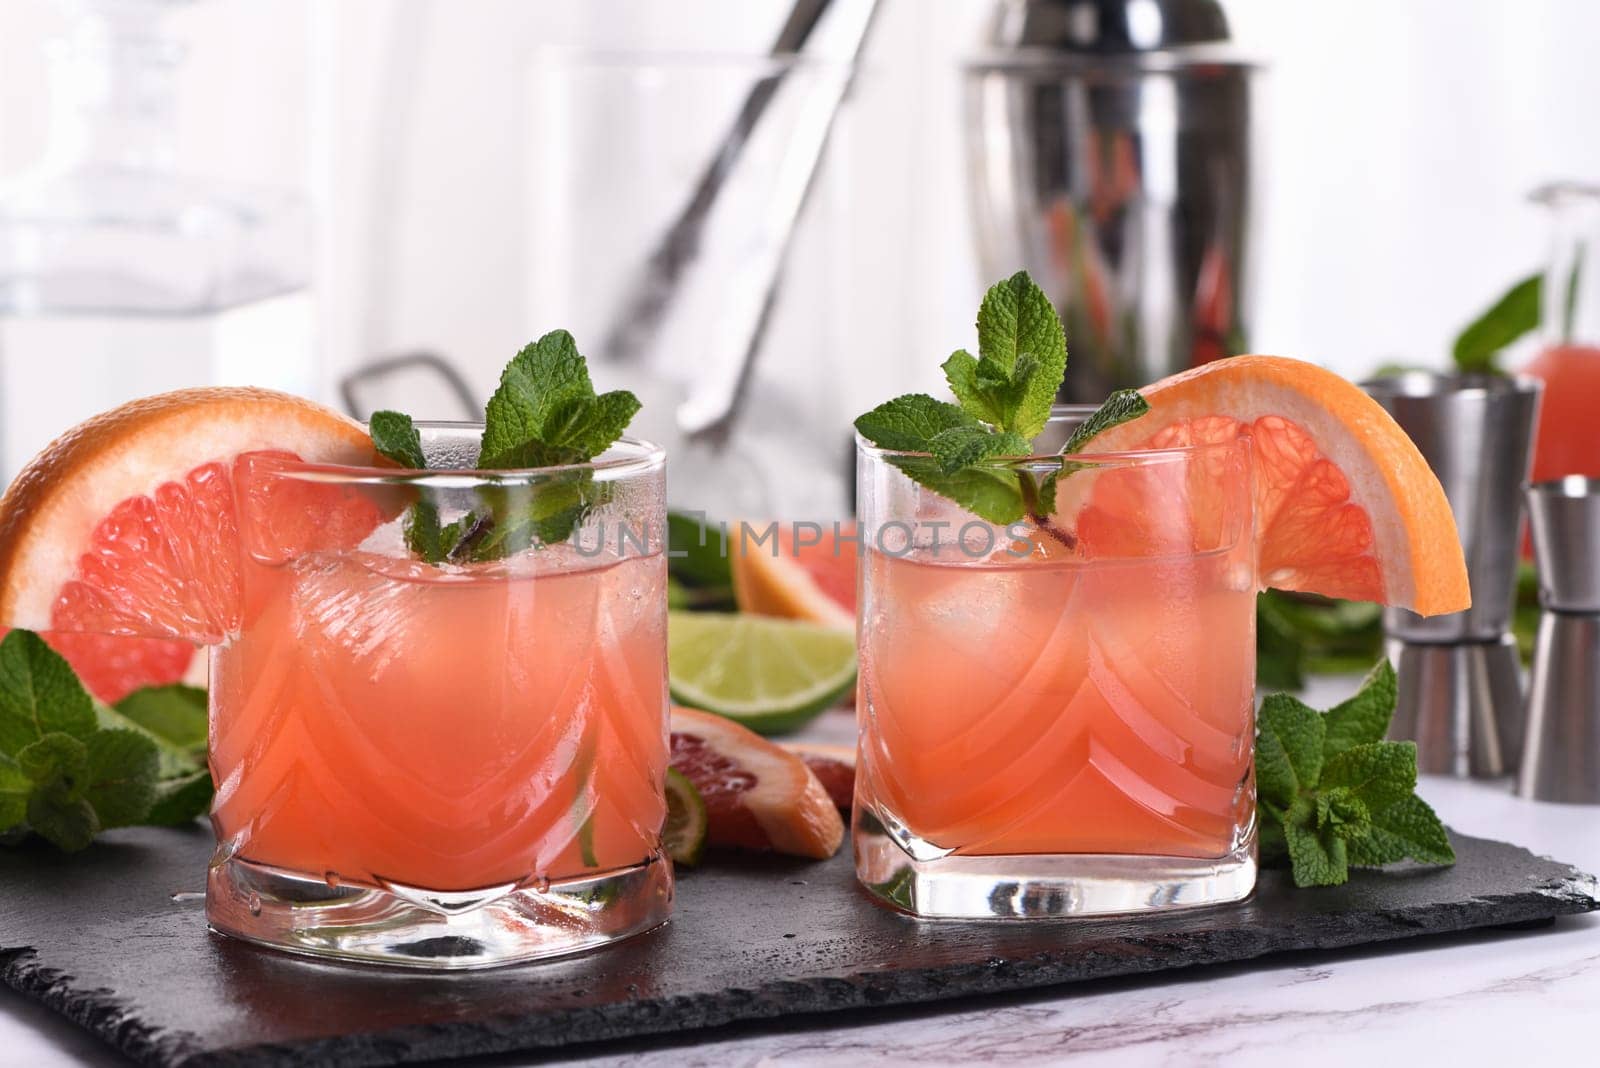 Taste the refreshing Paloma Organic Grapefruit Tequila Cocktail and experience the real taste, in which citrus notes are replaced by waves of subtle sweetness of agave. The recipe for how to make such a cocktail